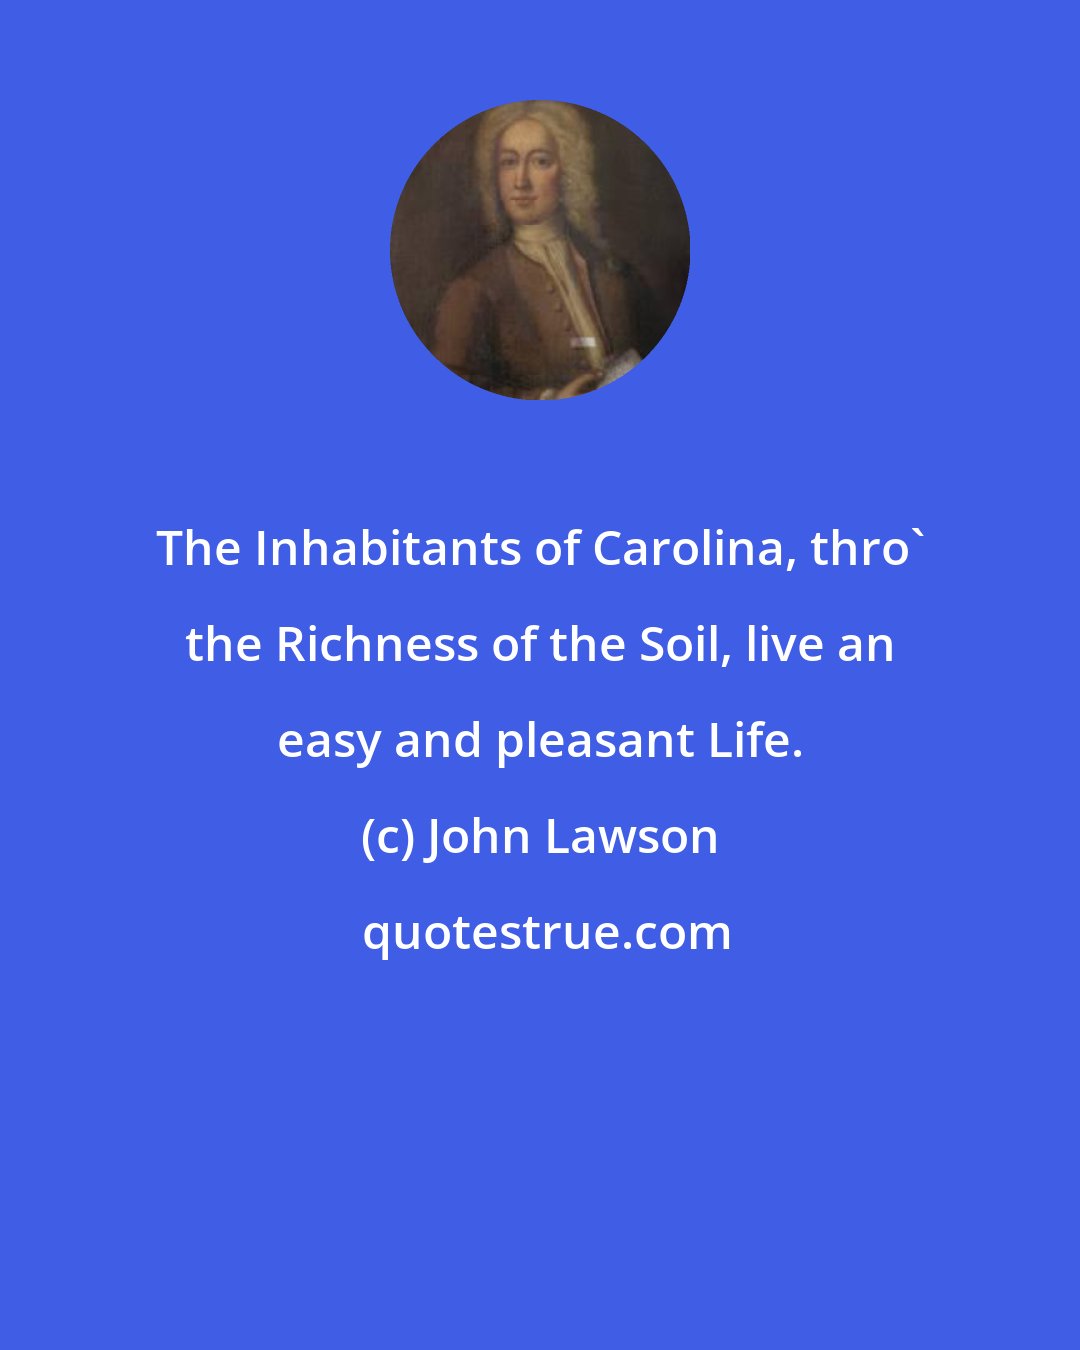 John Lawson: The Inhabitants of Carolina, thro' the Richness of the Soil, live an easy and pleasant Life.